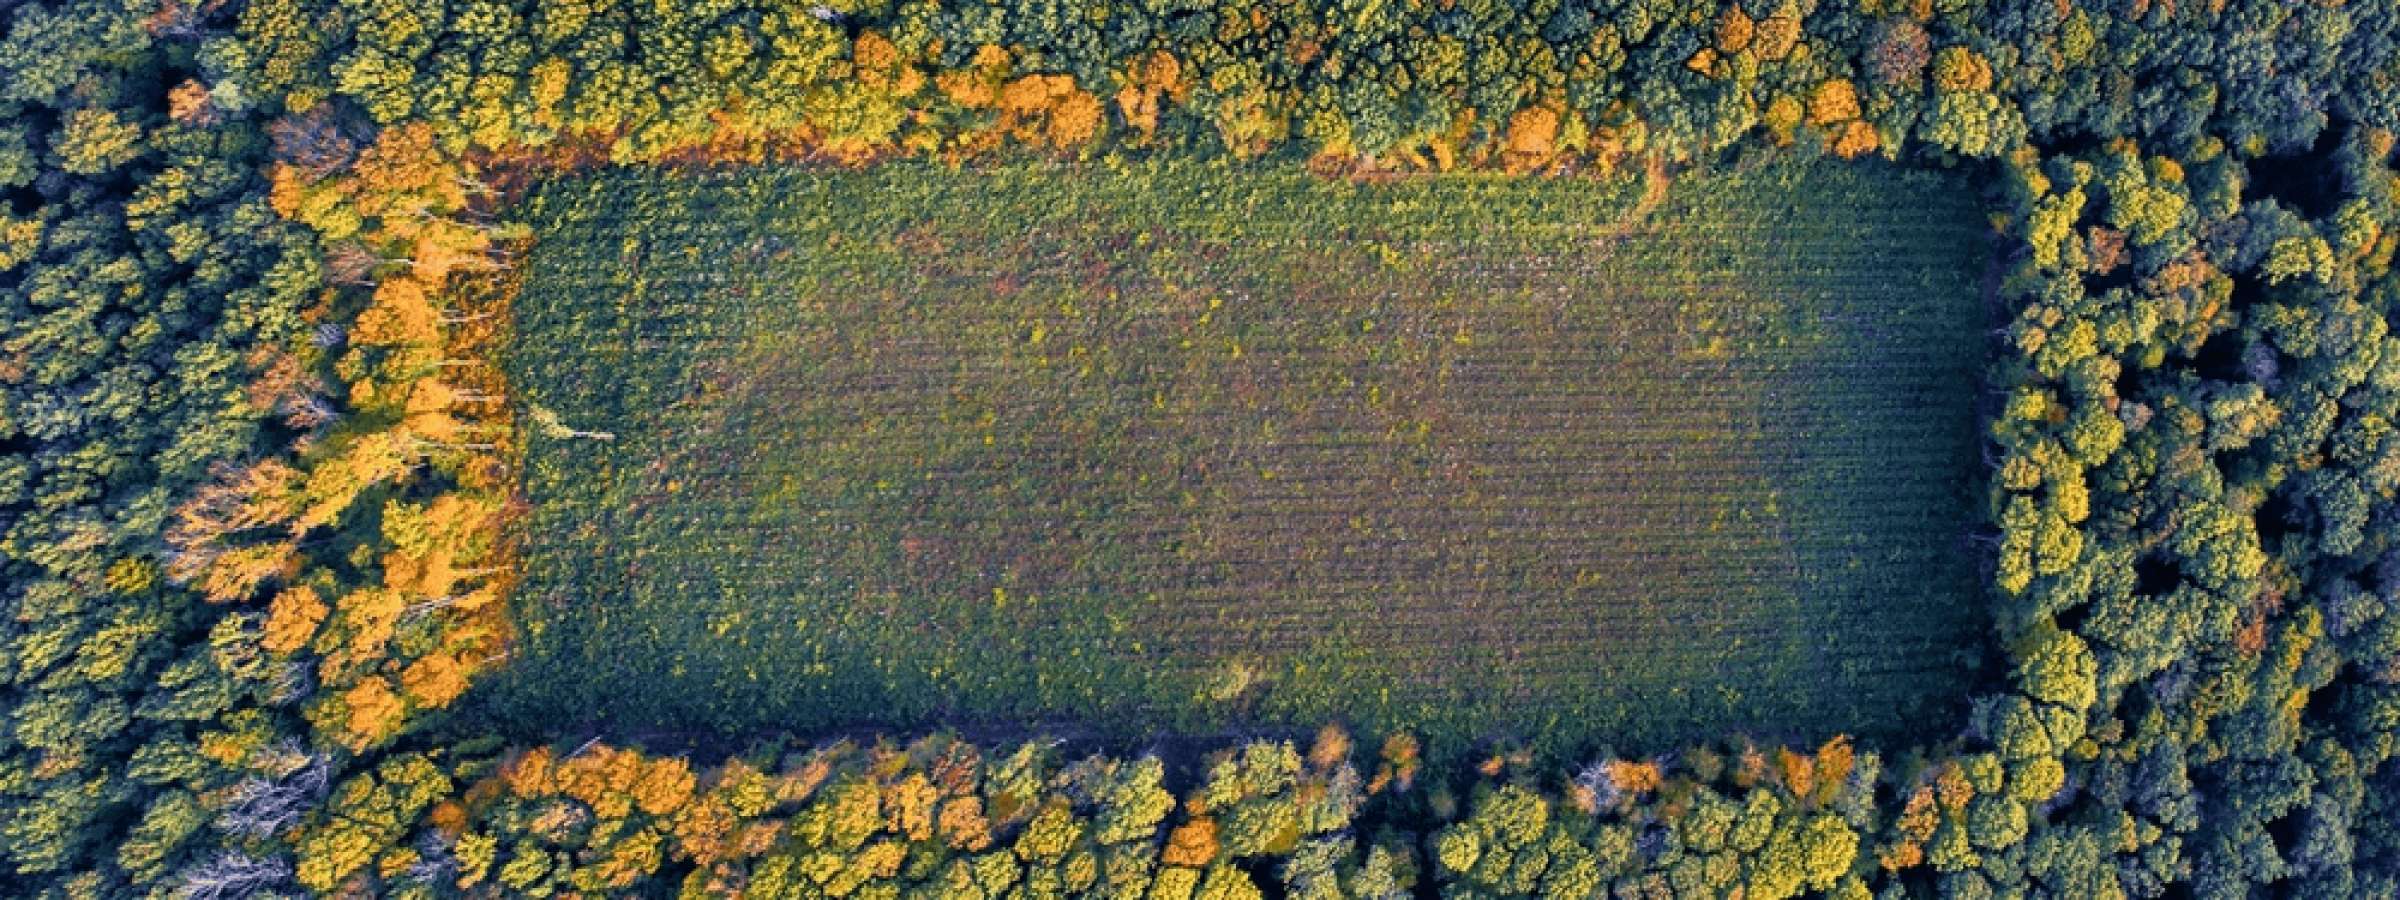 Aerial view of a rectangular deforested are